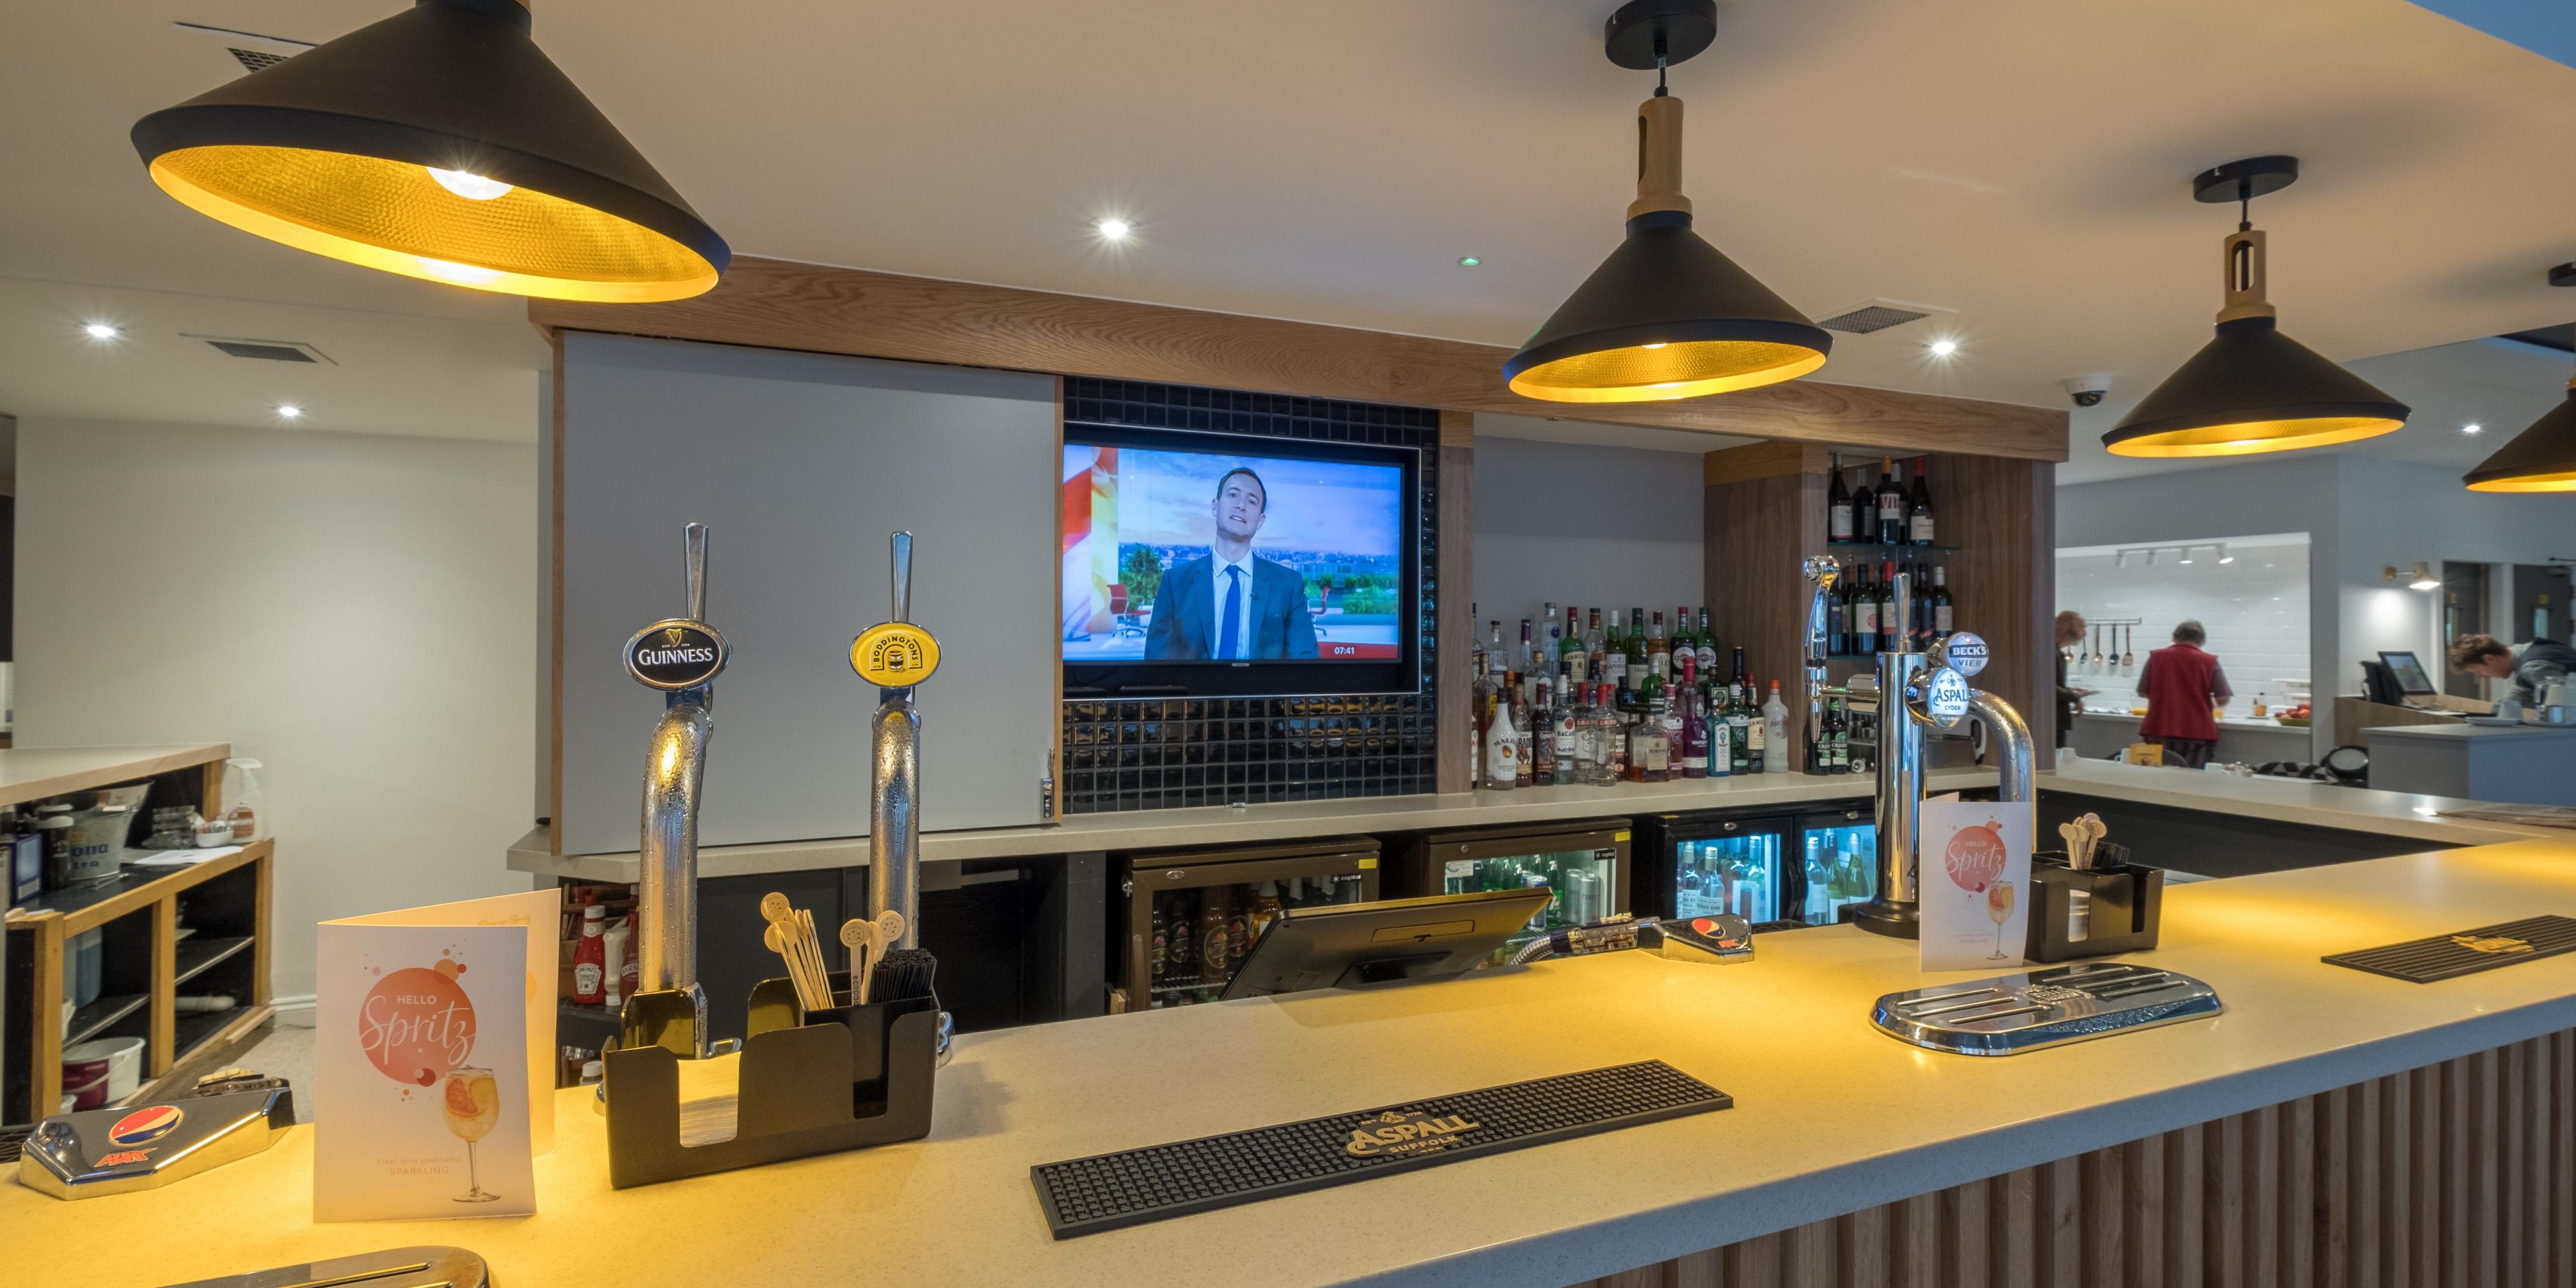 A great selection of drinks and food in our new bar area